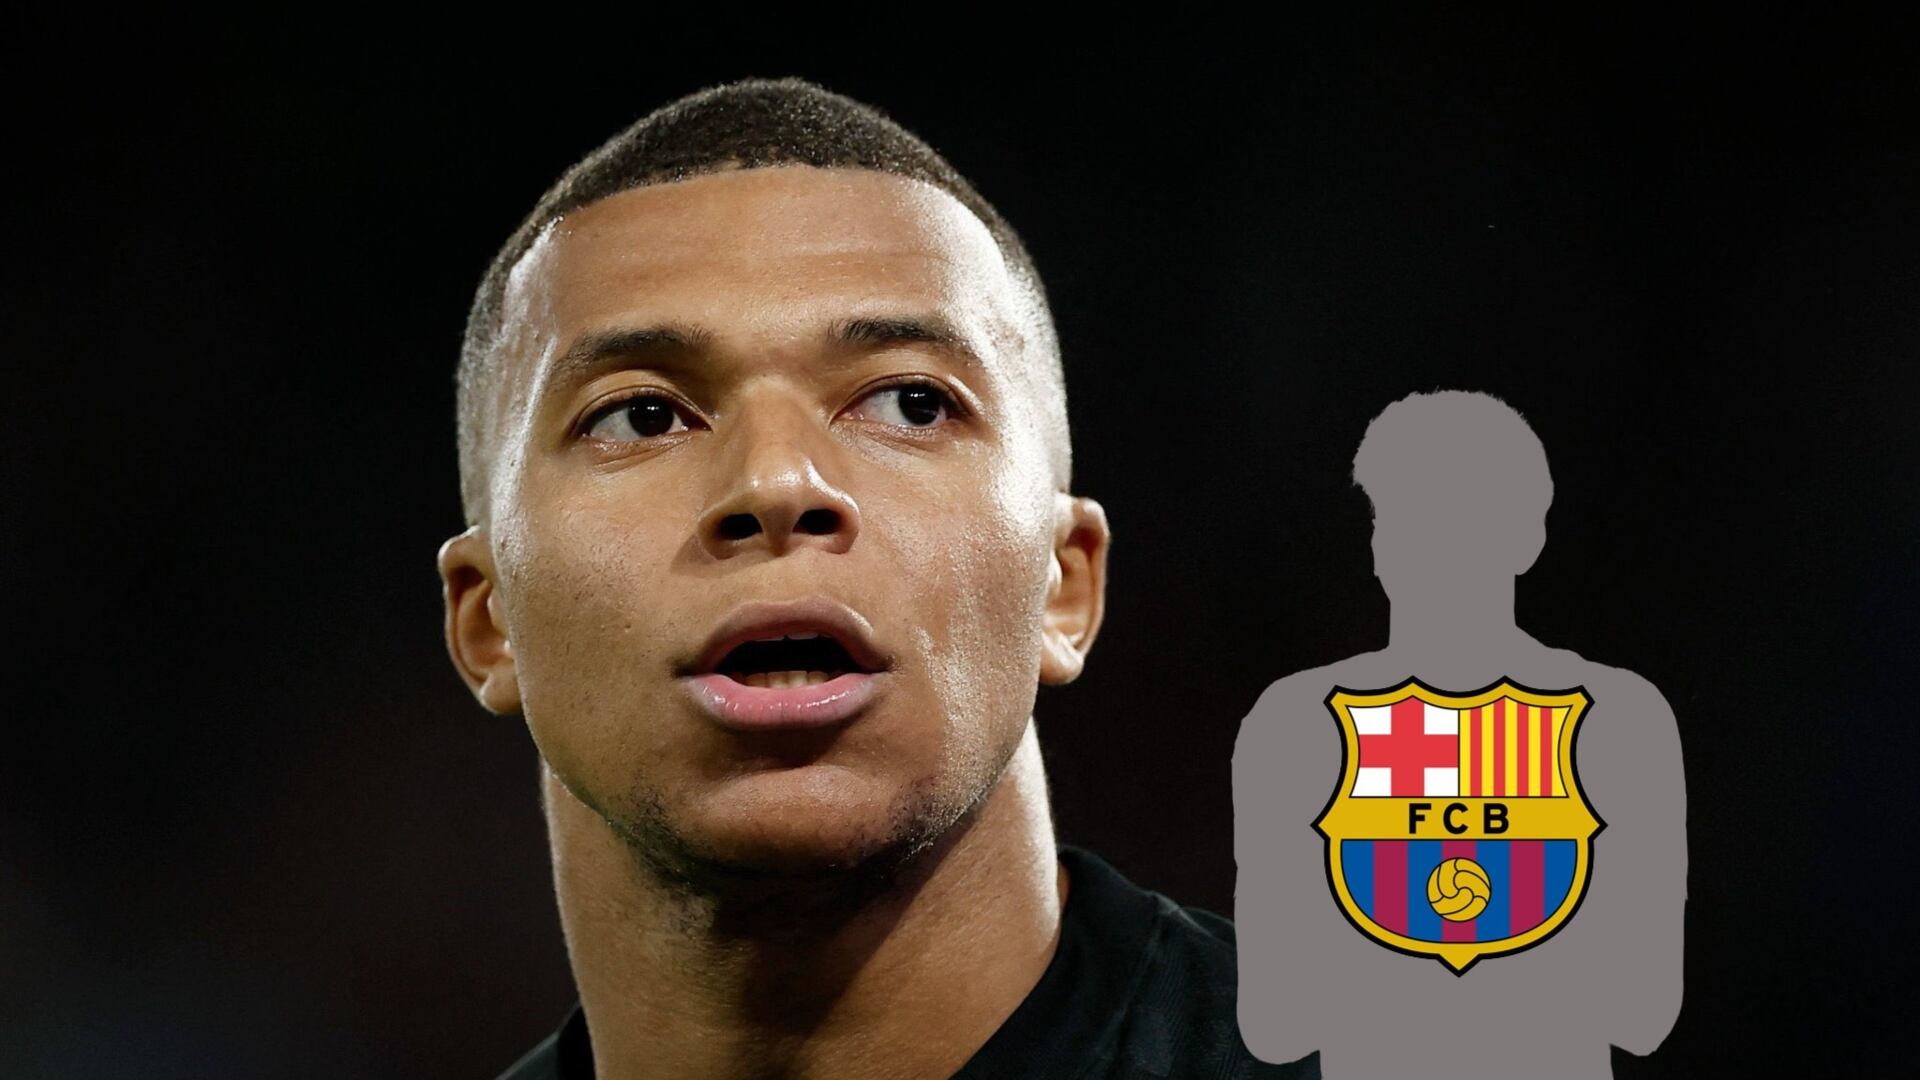 How will Real Madrid fans take it? Mbappé and his compliments to a Barcelona player that Madrid fans won’t like